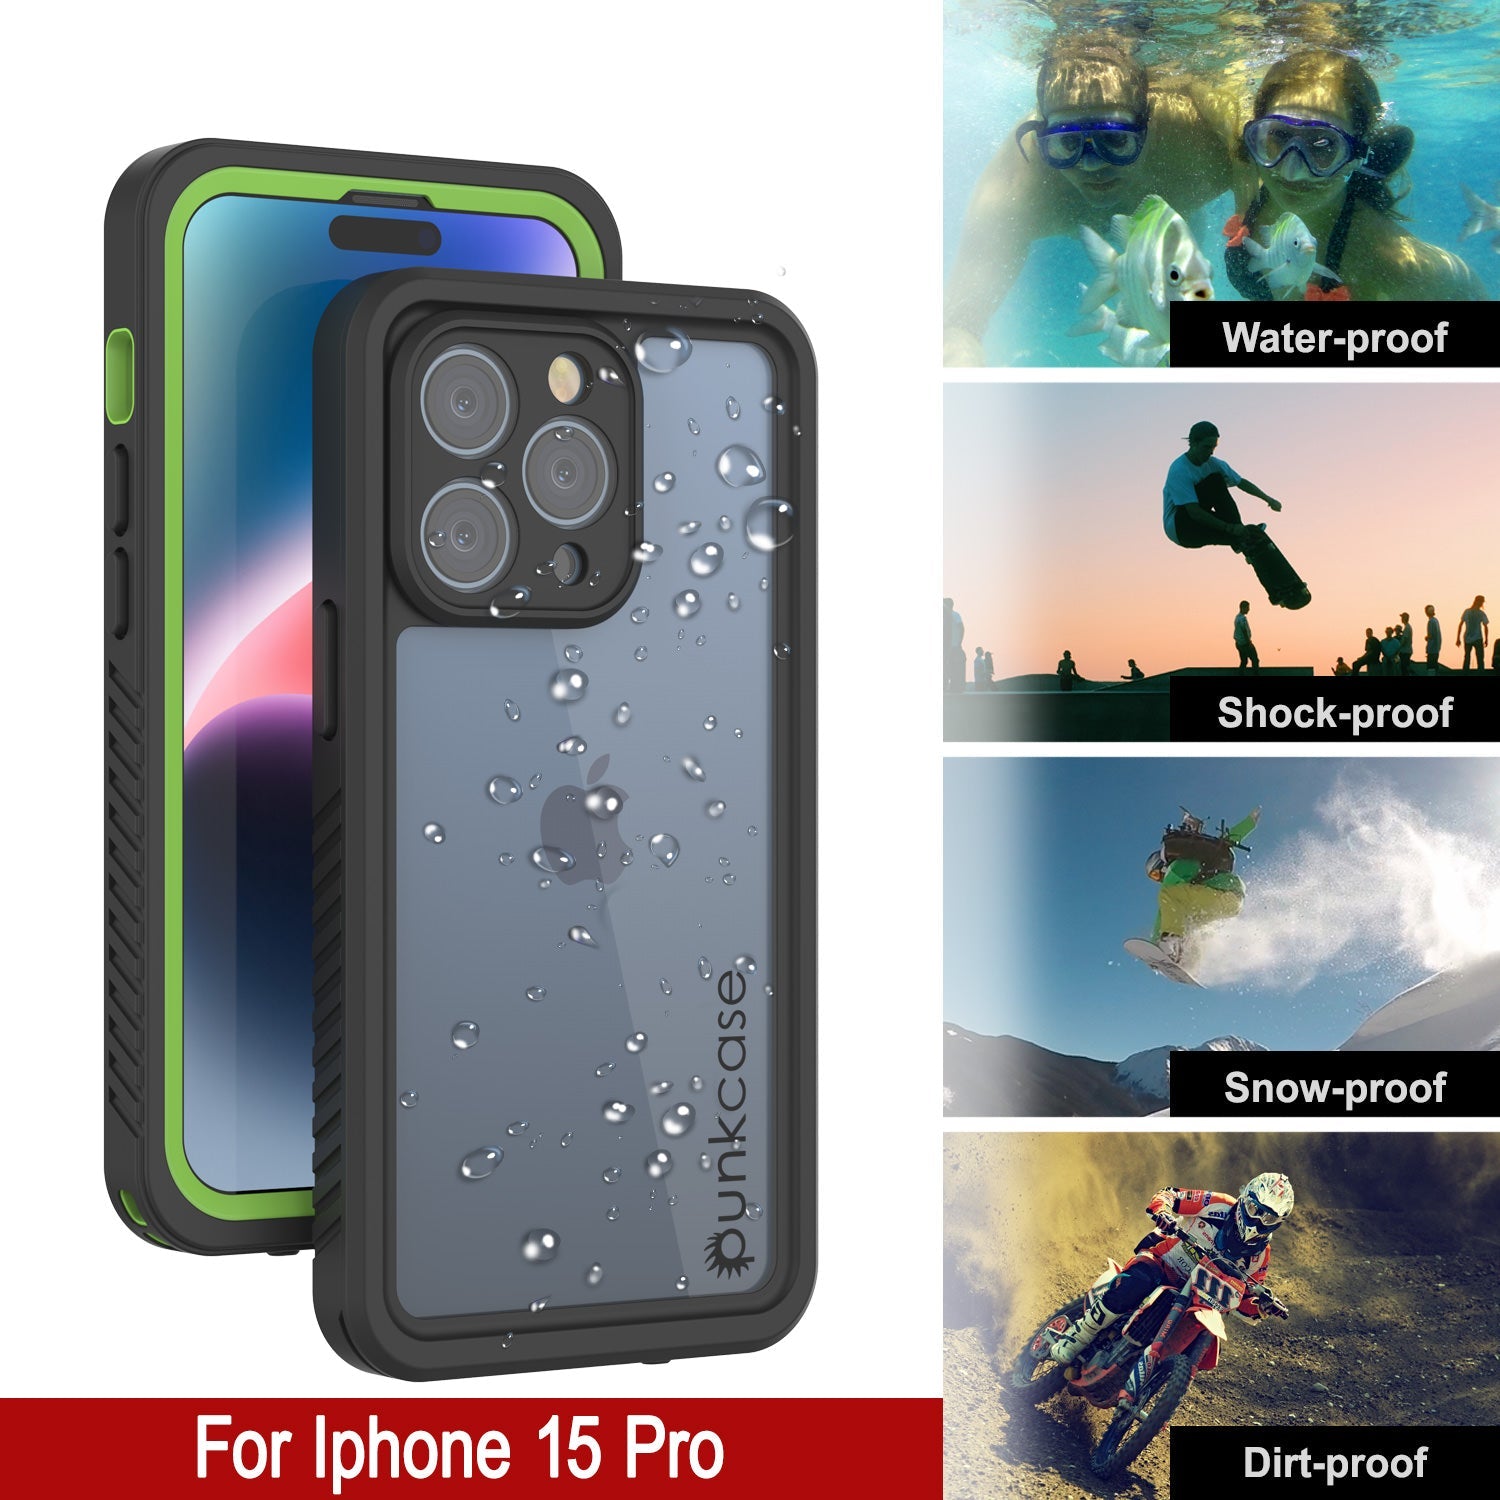 iPhone 15 Pro Waterproof Case, Punkcase [Extreme Series] Armor Cover W/ Built In Screen Protector [Light Green]